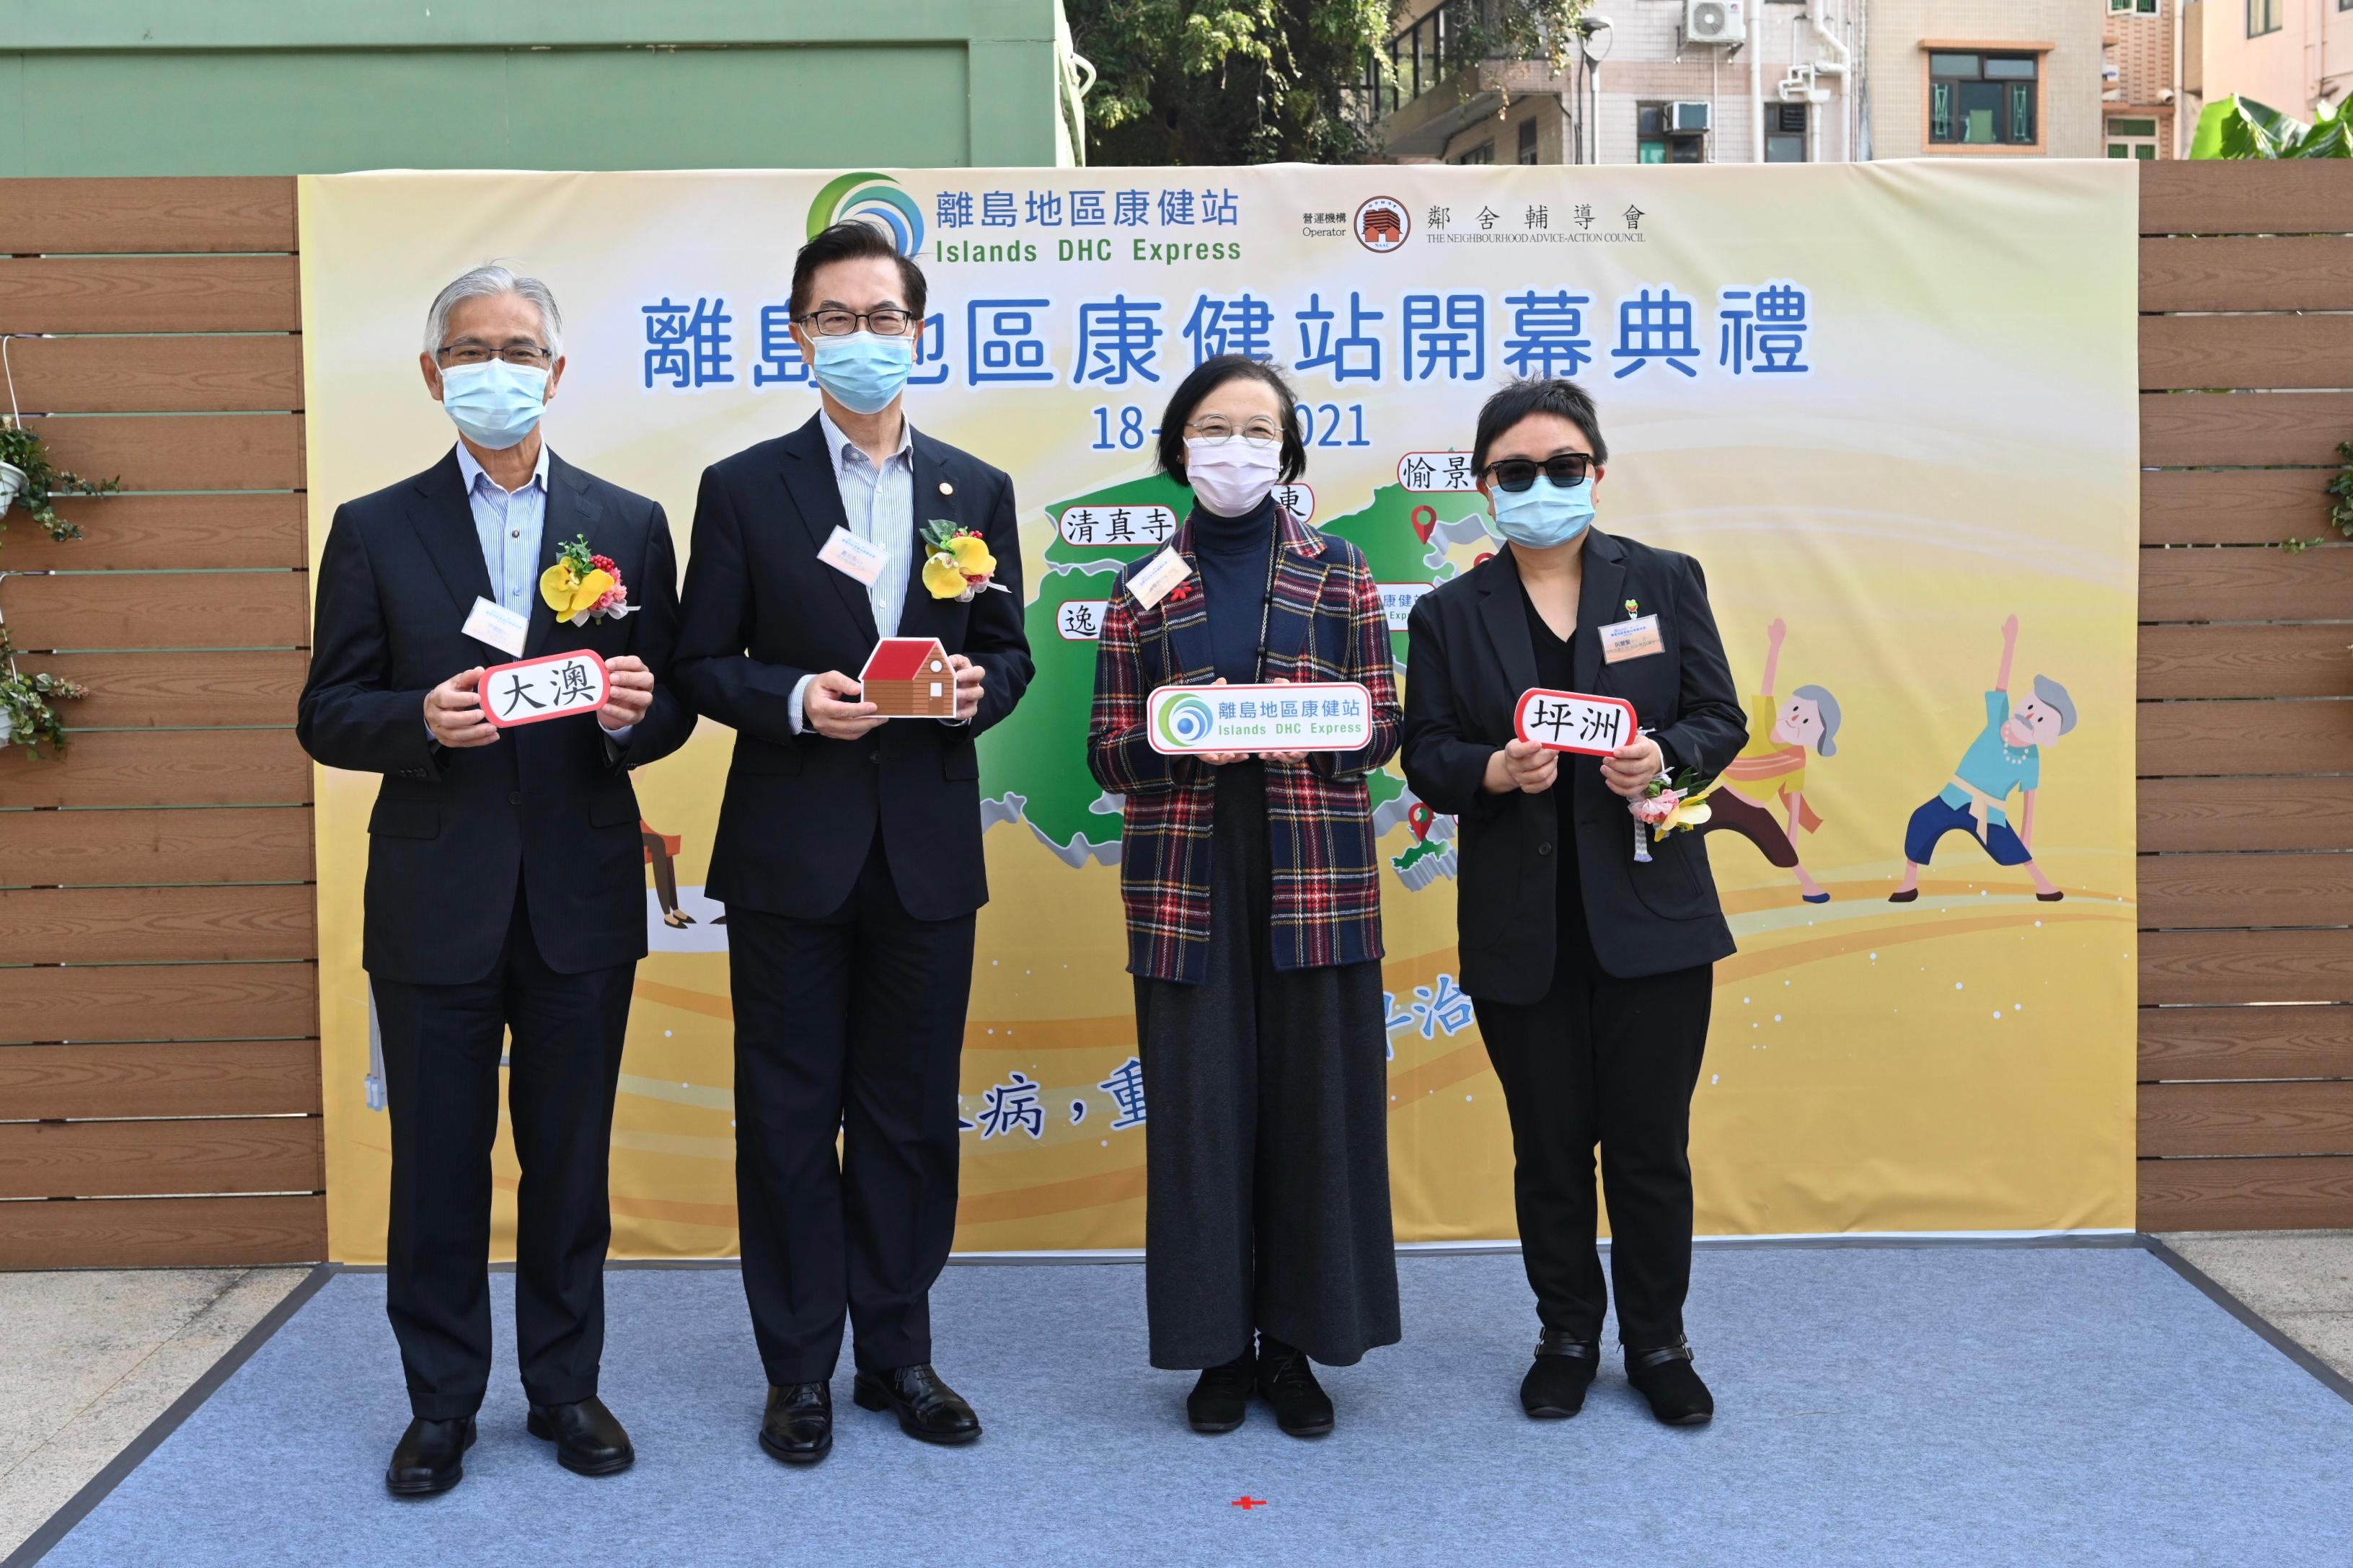 The Secretary for Food and Health, Professor Sophia Chan (second right); the Deputy Secretary for Food and Health (Health), Miss Amy Yuen (first right); the Chairman of the Executive Committee of the Neighbourhood Advice-Action Council (NAAC), Mr Tony Yen (second left); and the Chairman of the Health Care Service Sub-committee of the NAAC, Dr Wan Tack-fan (first left), officiate at the opening ceremony of the Islands District Health Centre Express today (December 18).